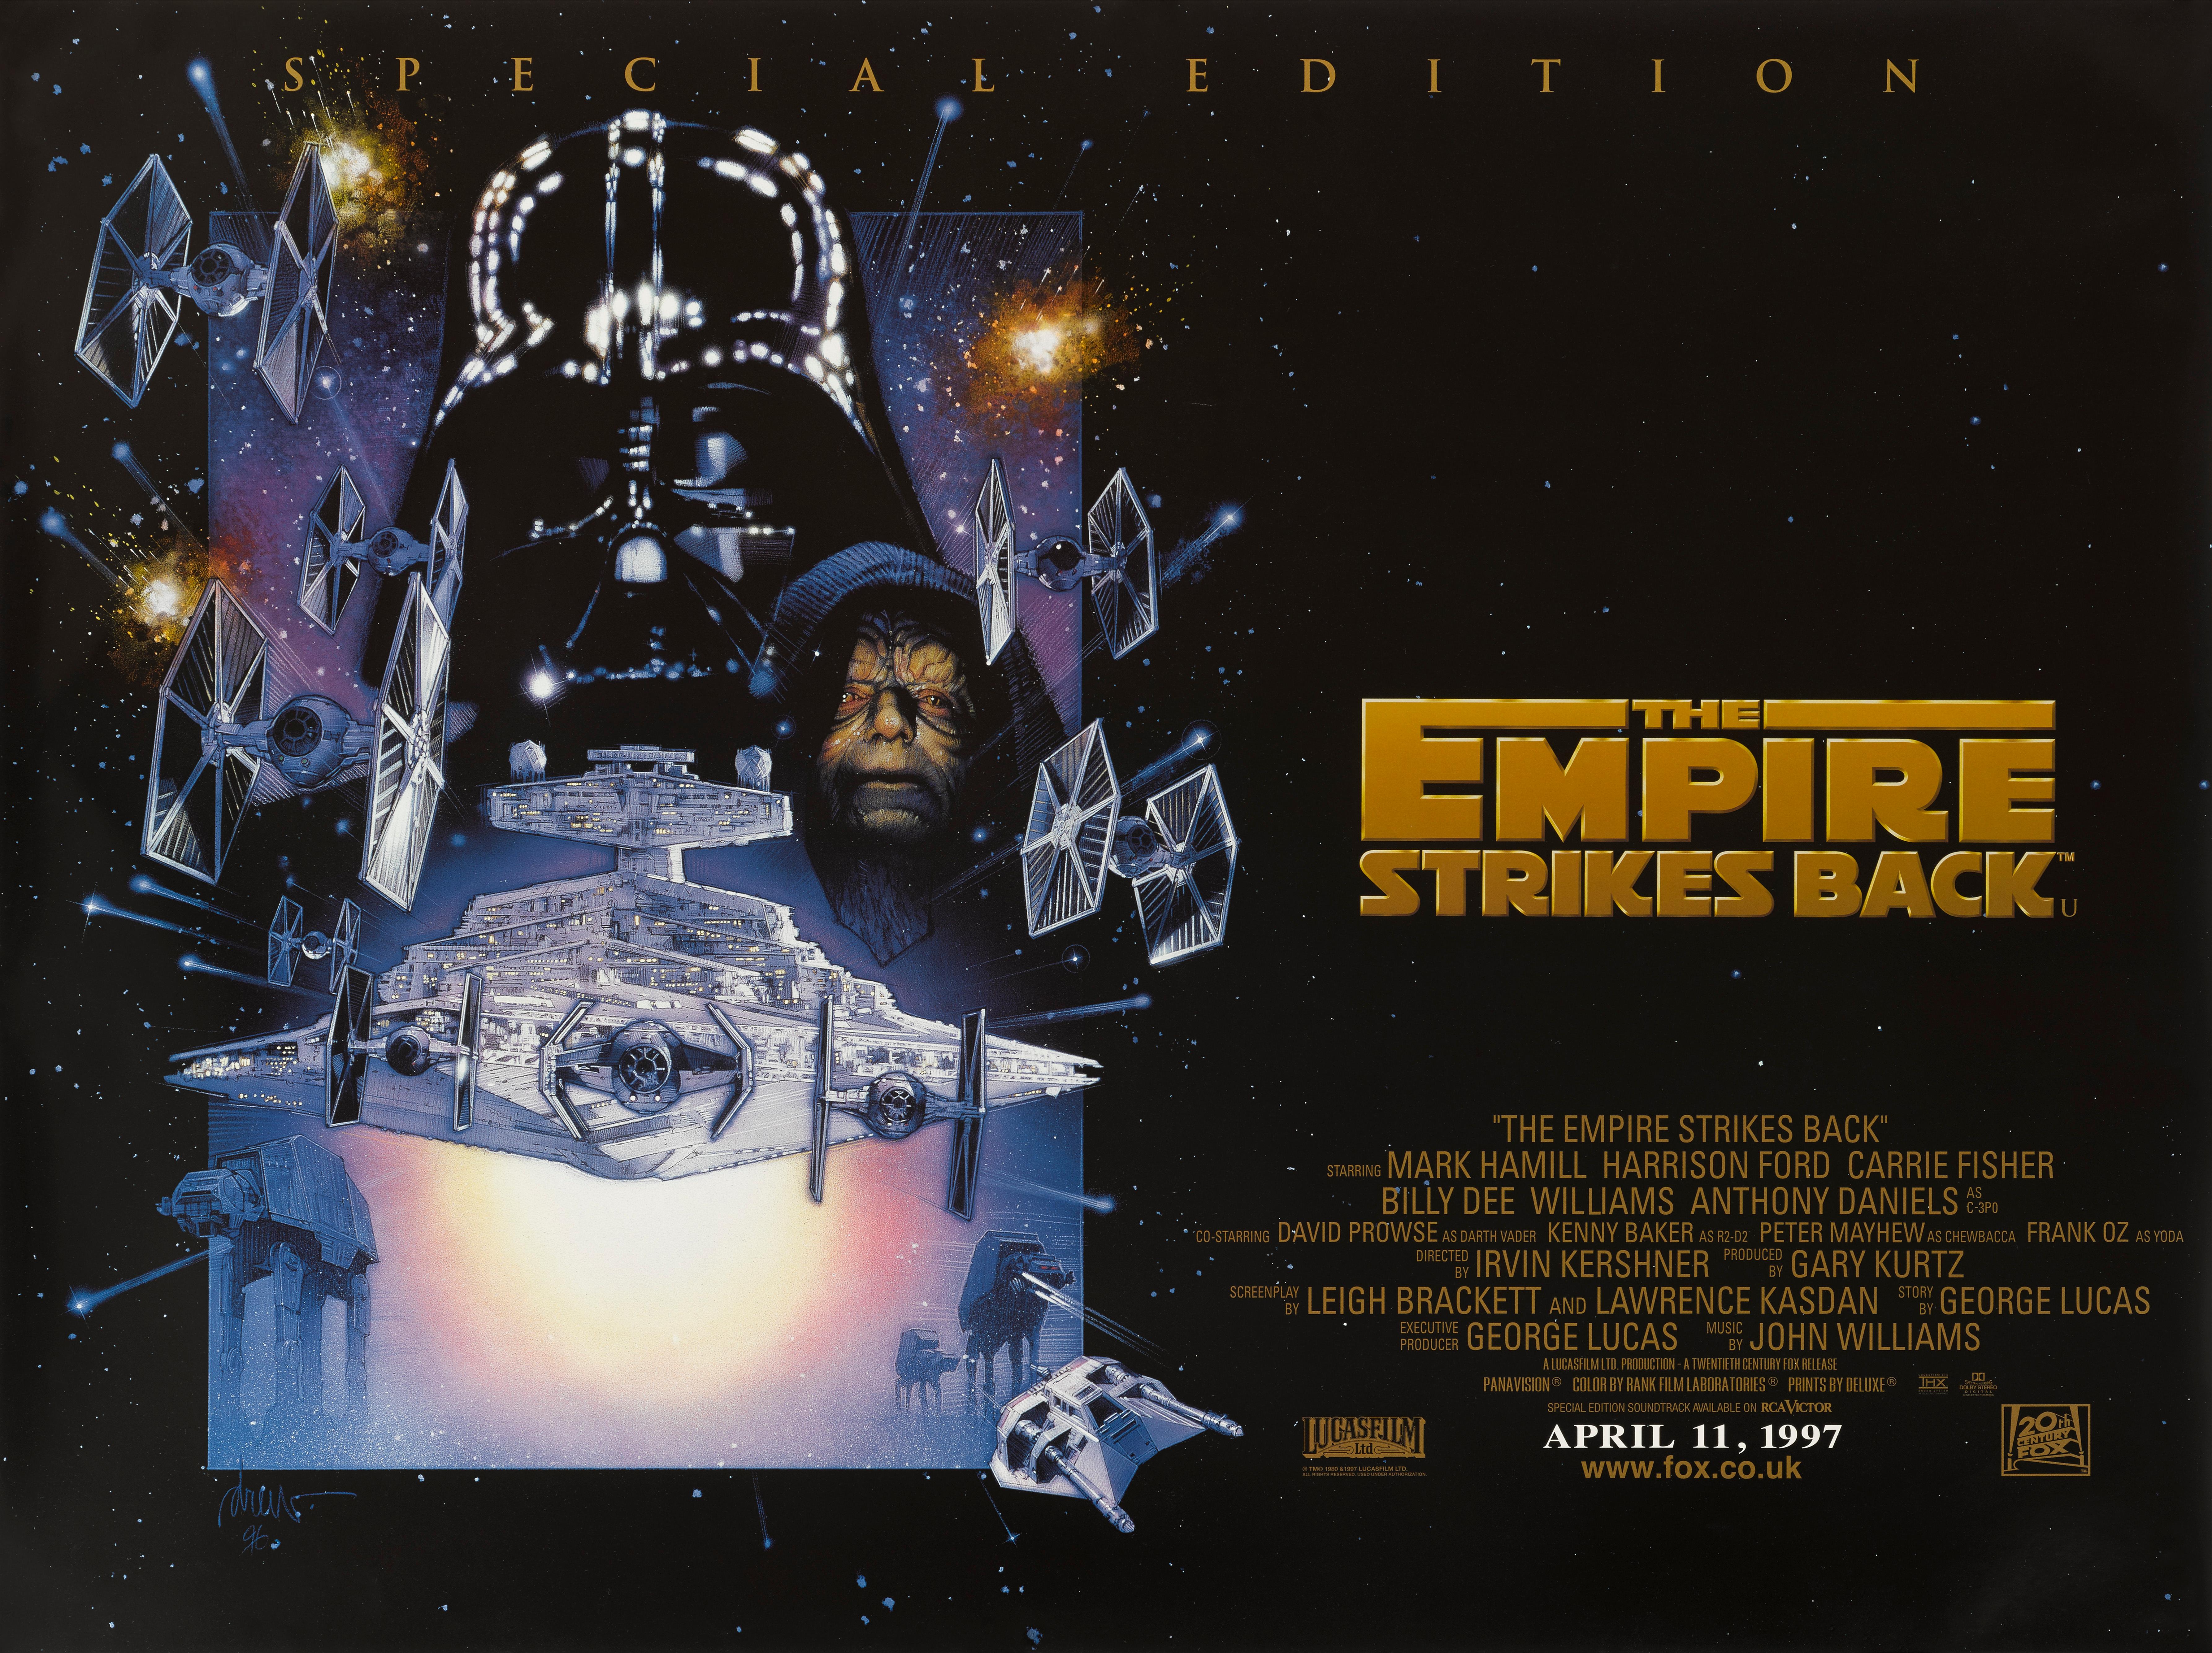 Original British film poster designed by Drew Struzan (b.1947) for the re-release of the film in 1997.
The Empire Strikes Back also known as (Star Wars: Episode V, The Empire Strikes Back) this was the second movie in the Star Wars saga staring